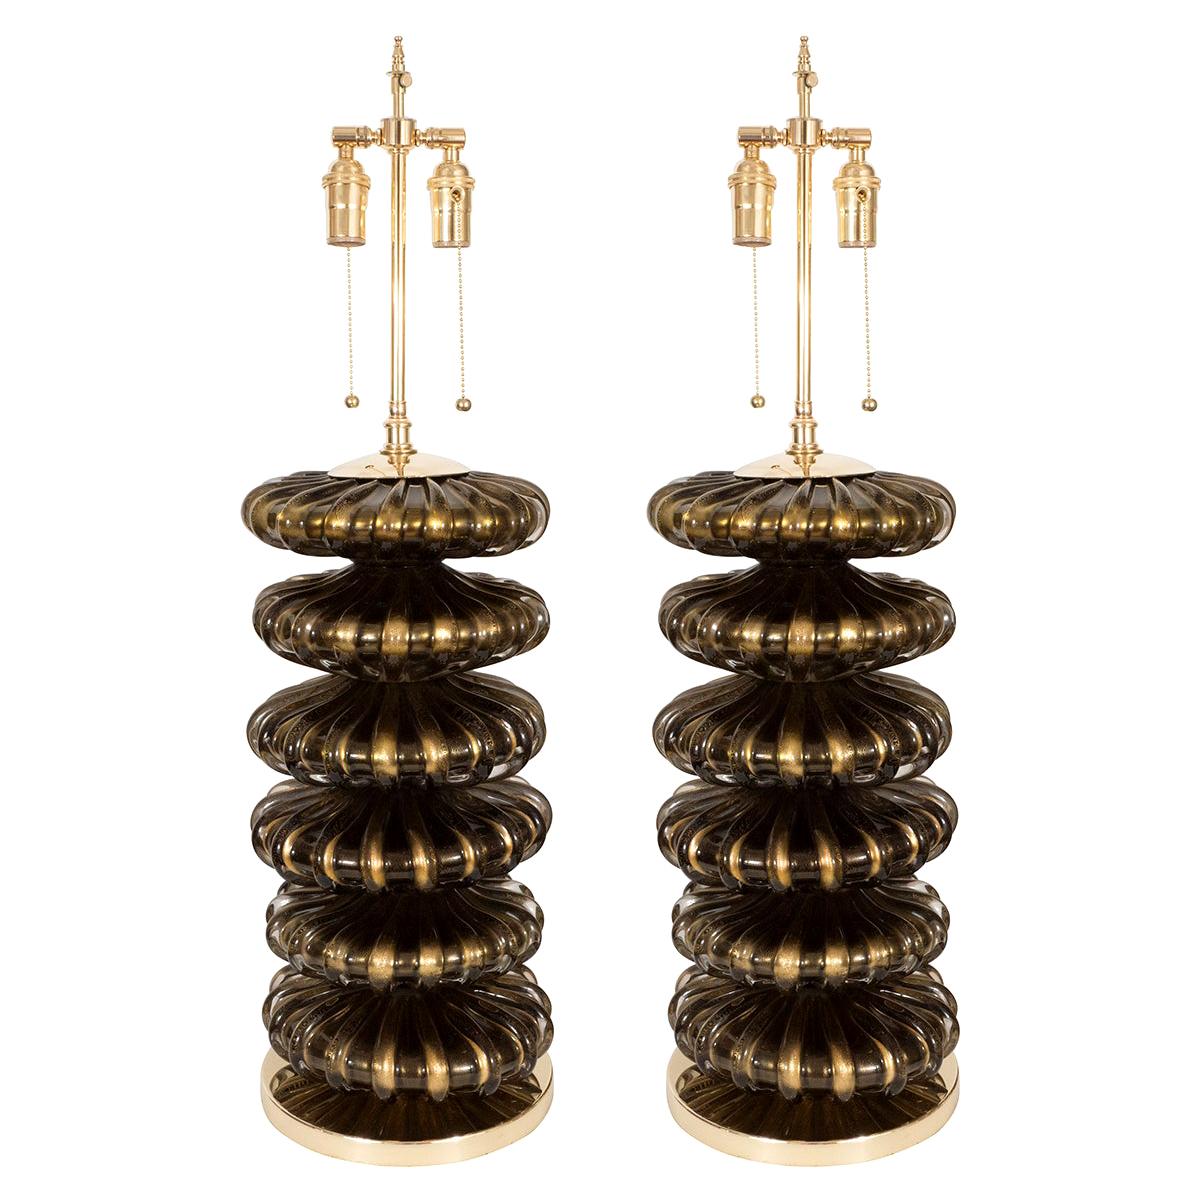 Pair of Stacked Murano Glass Element Lamps